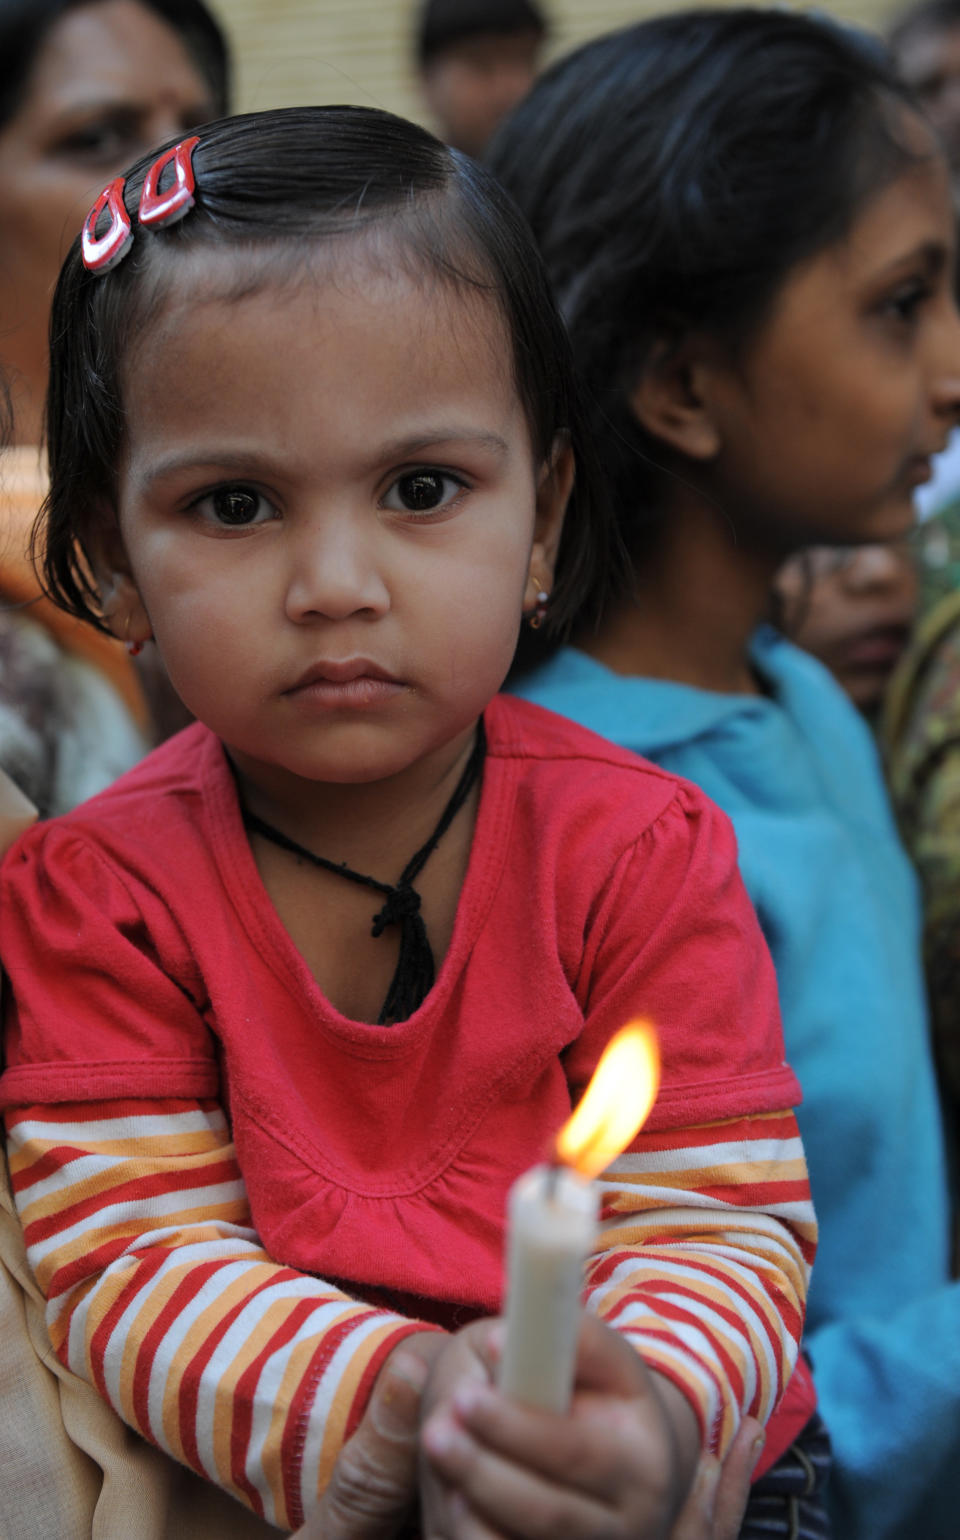  A young Indian child holds a lighted candle as she joins others during a protest rally in Ahmedabad on December 30, 2012, following the cremation of a gangrape victim in the Indian capital. (SAM PANTHAKY/AFP/Getty Images)